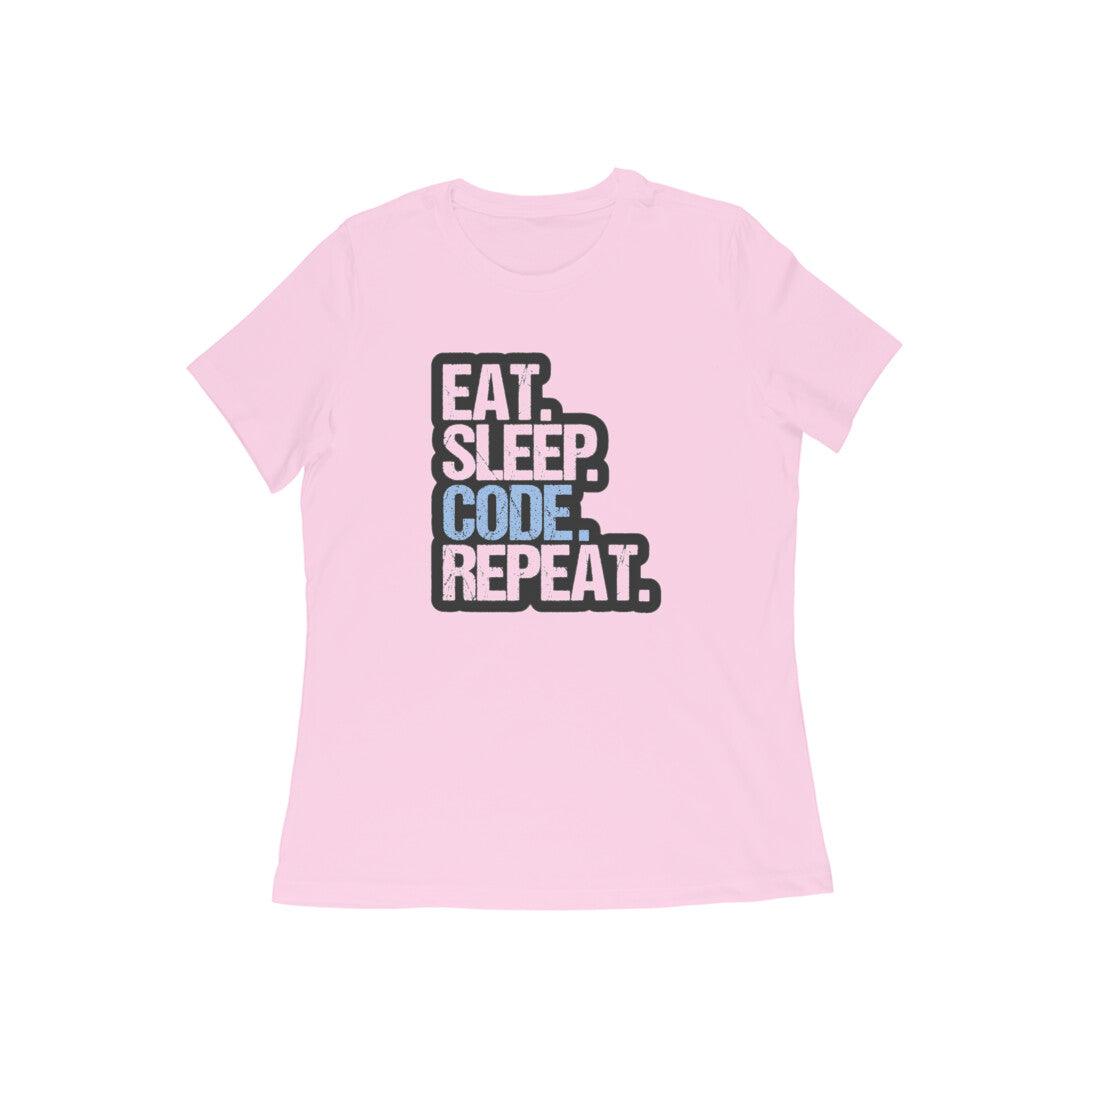 Light baby pink Cotton Tshirt for Software Engineers